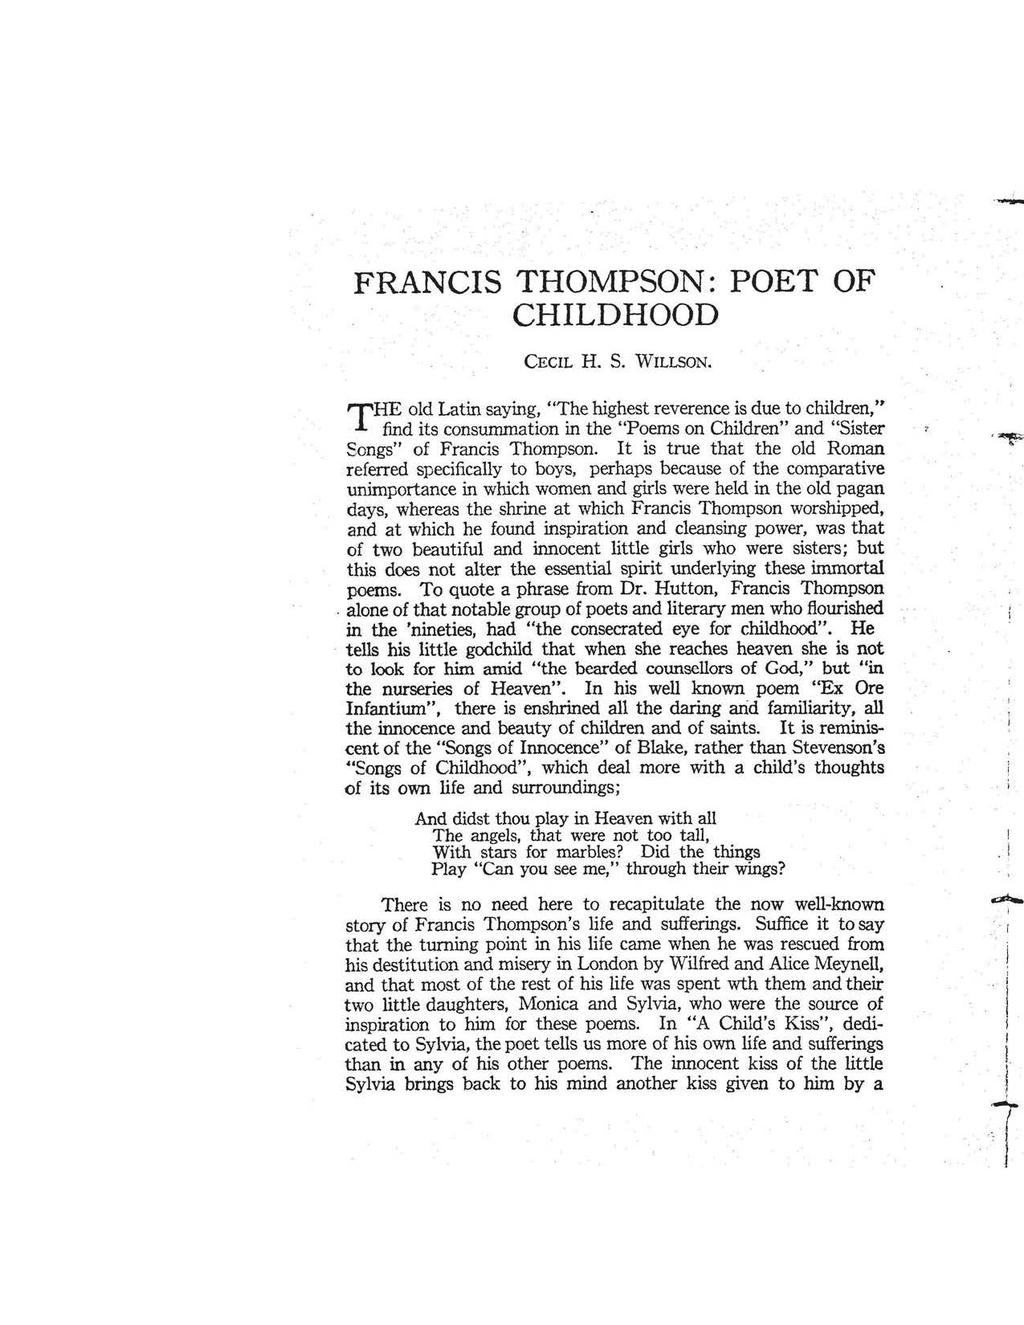 - FRANCIS THOMPSON: POET OF CHILDHOOD CECIL H. S. WILLSON.